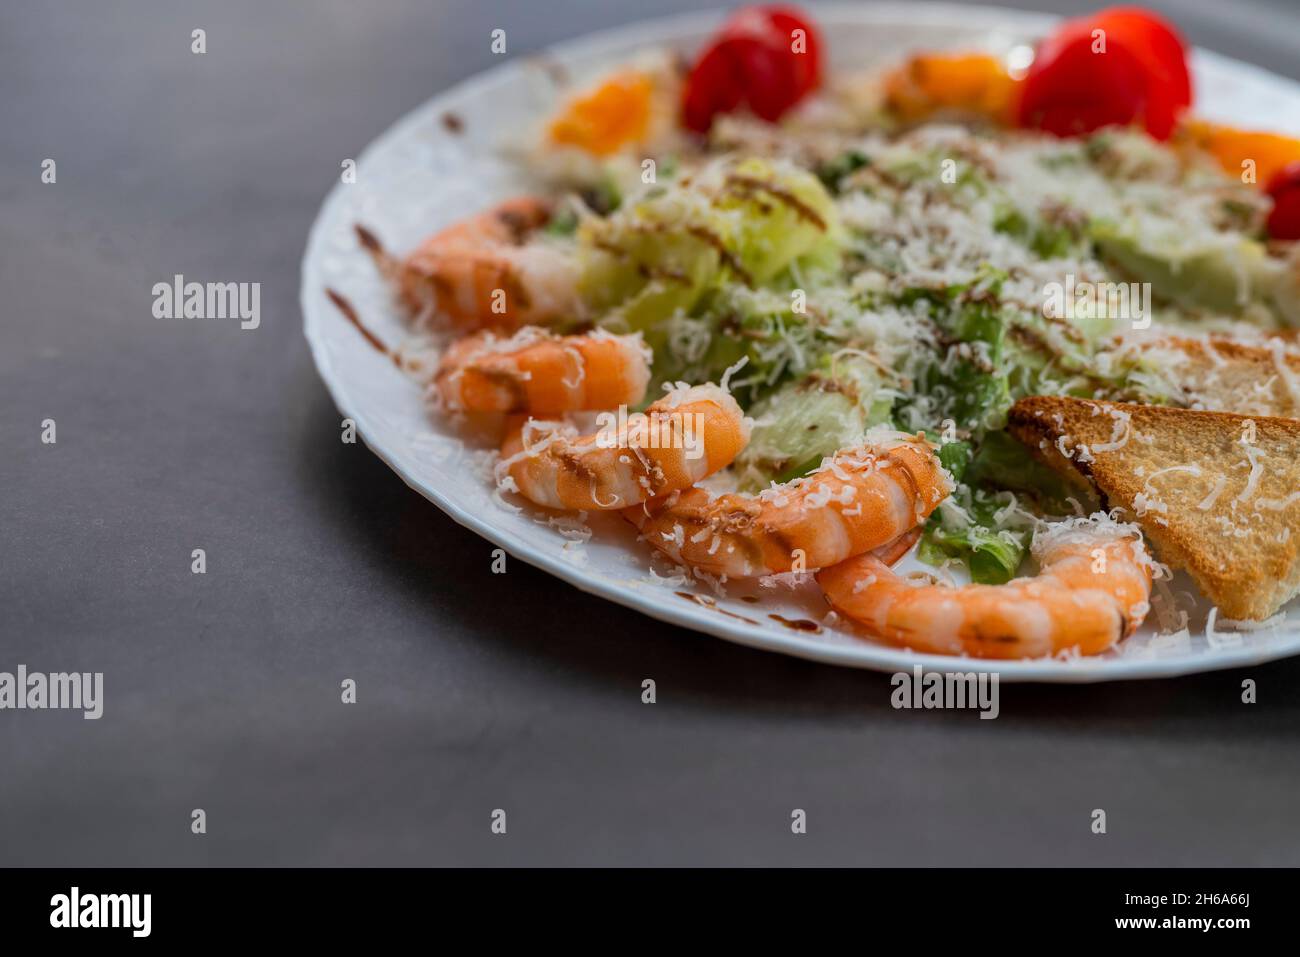 Caesar salad dish with shrimp lettuce and cherry tomatoes Stock Photo